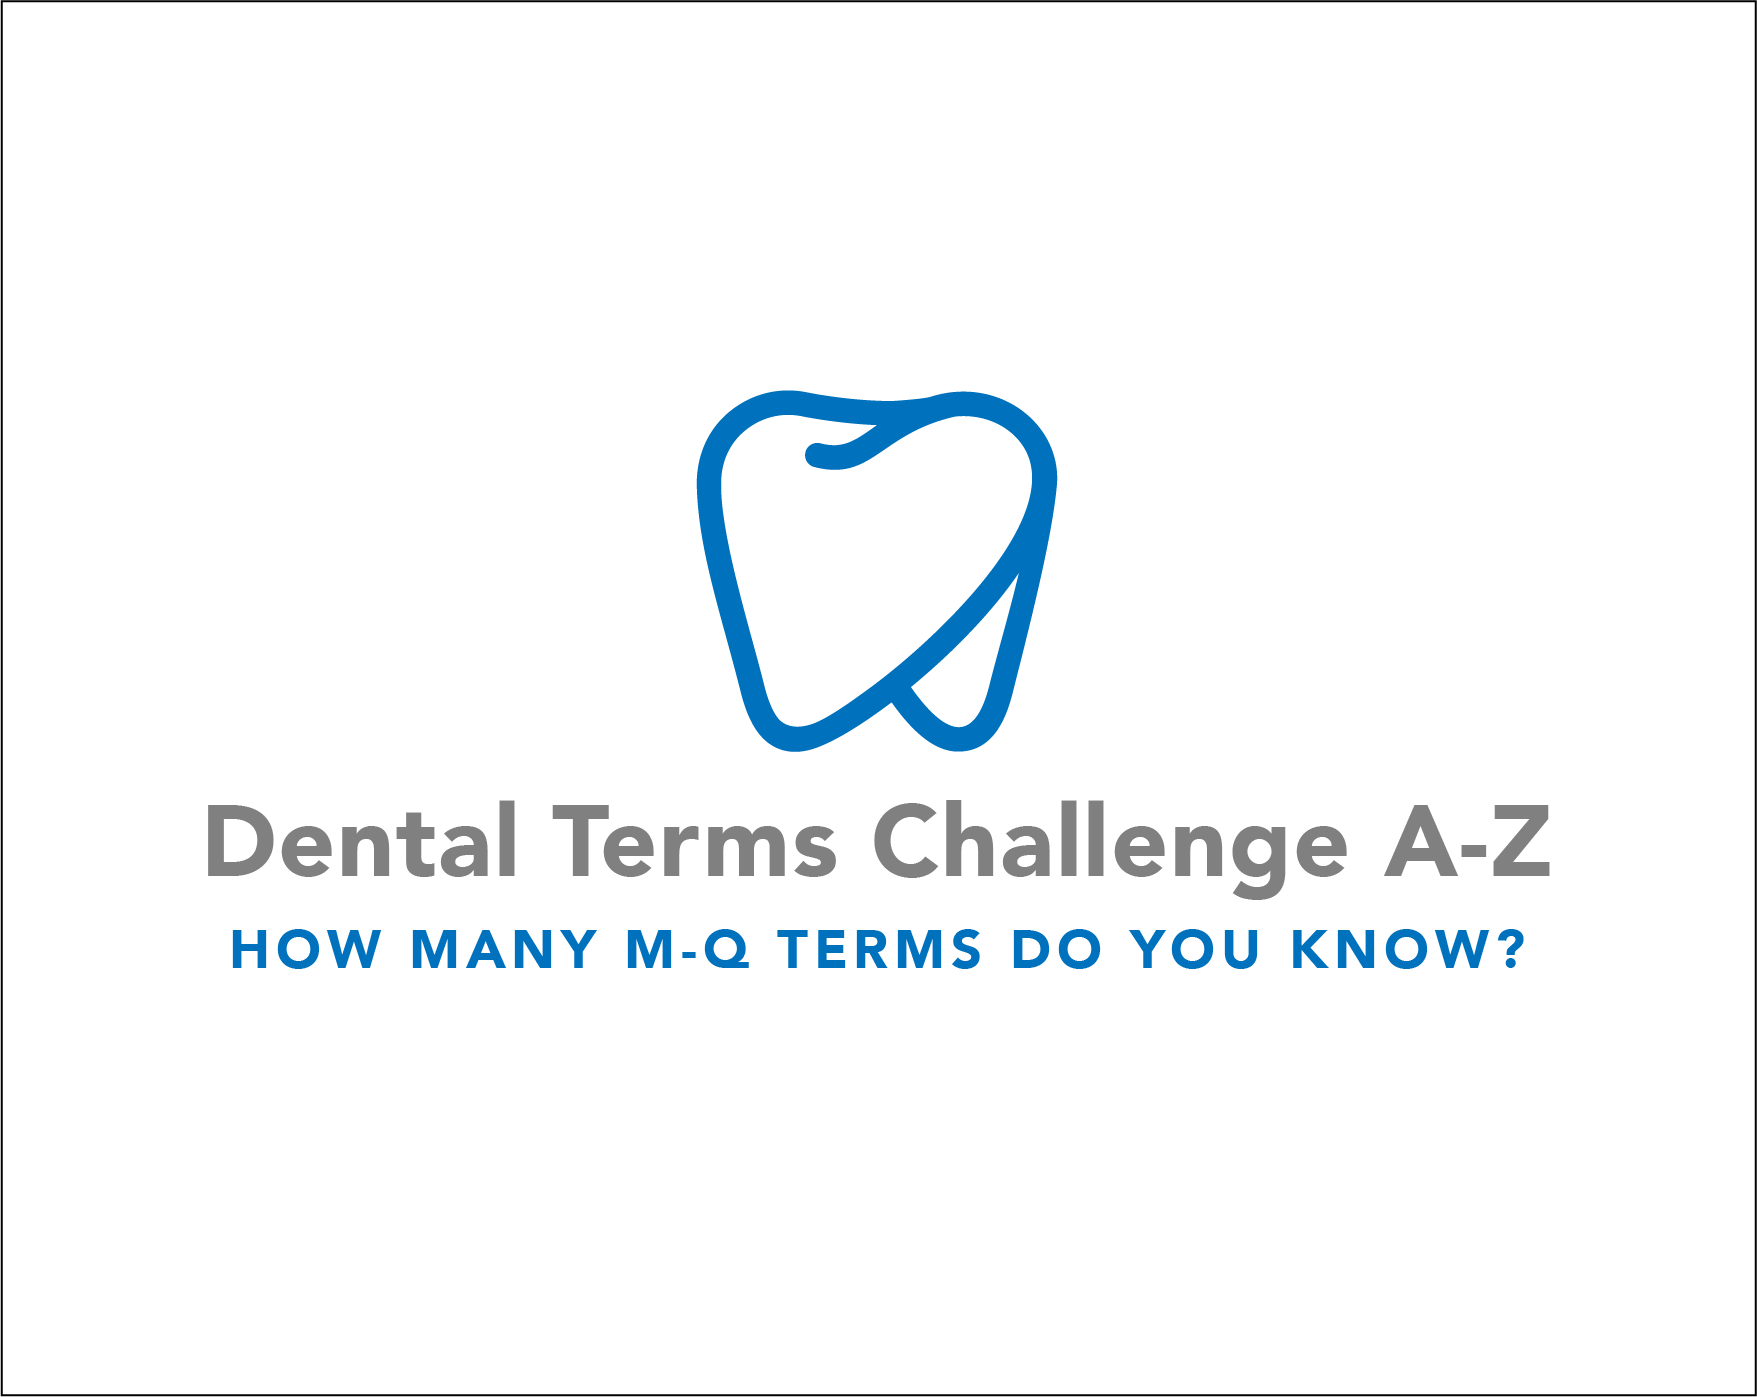 Dental Terms Challenge A-Z Part 3 – How many M-Q terms do you know?